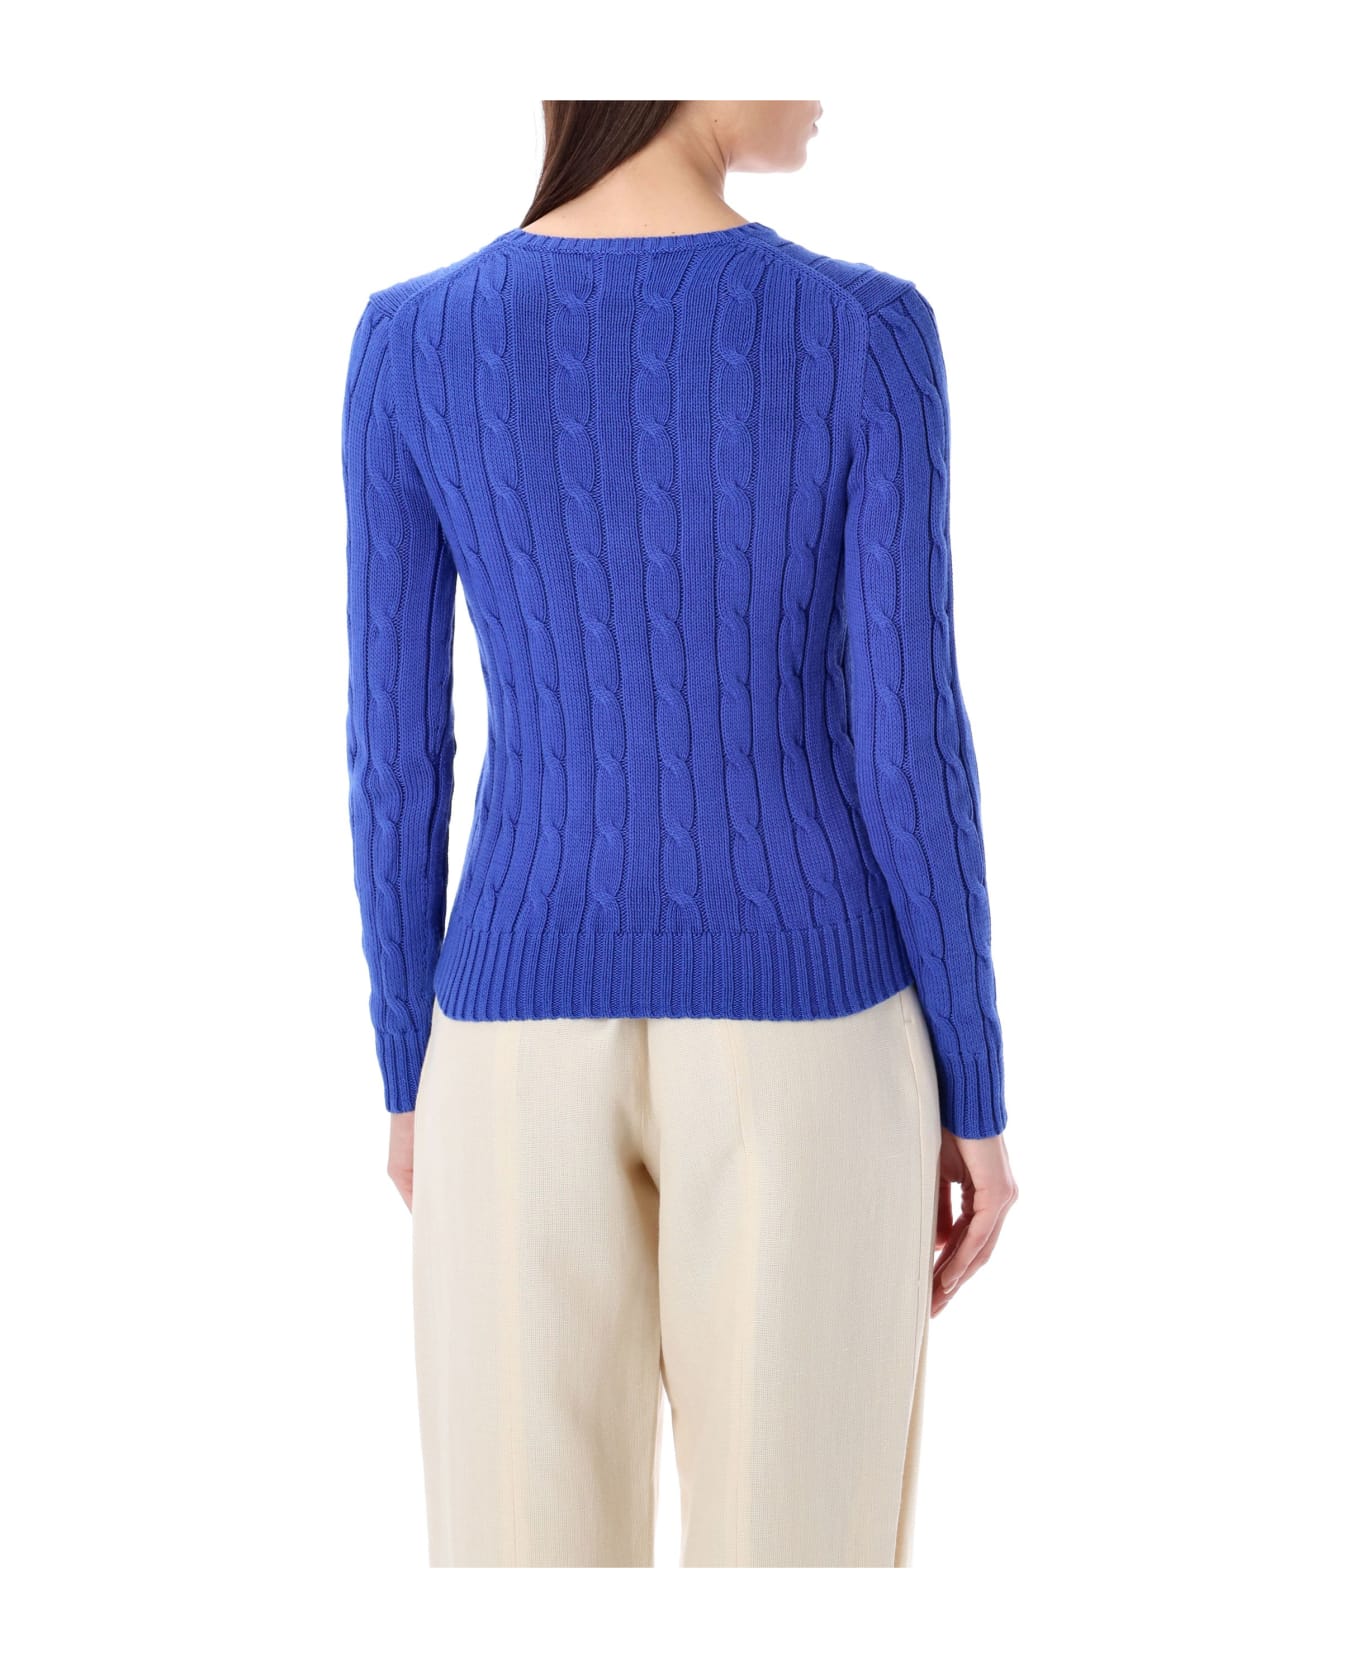 Polo Ralph Lauren Cable-knit Cotton Crewneck Sweater - RUGBY ROYAL